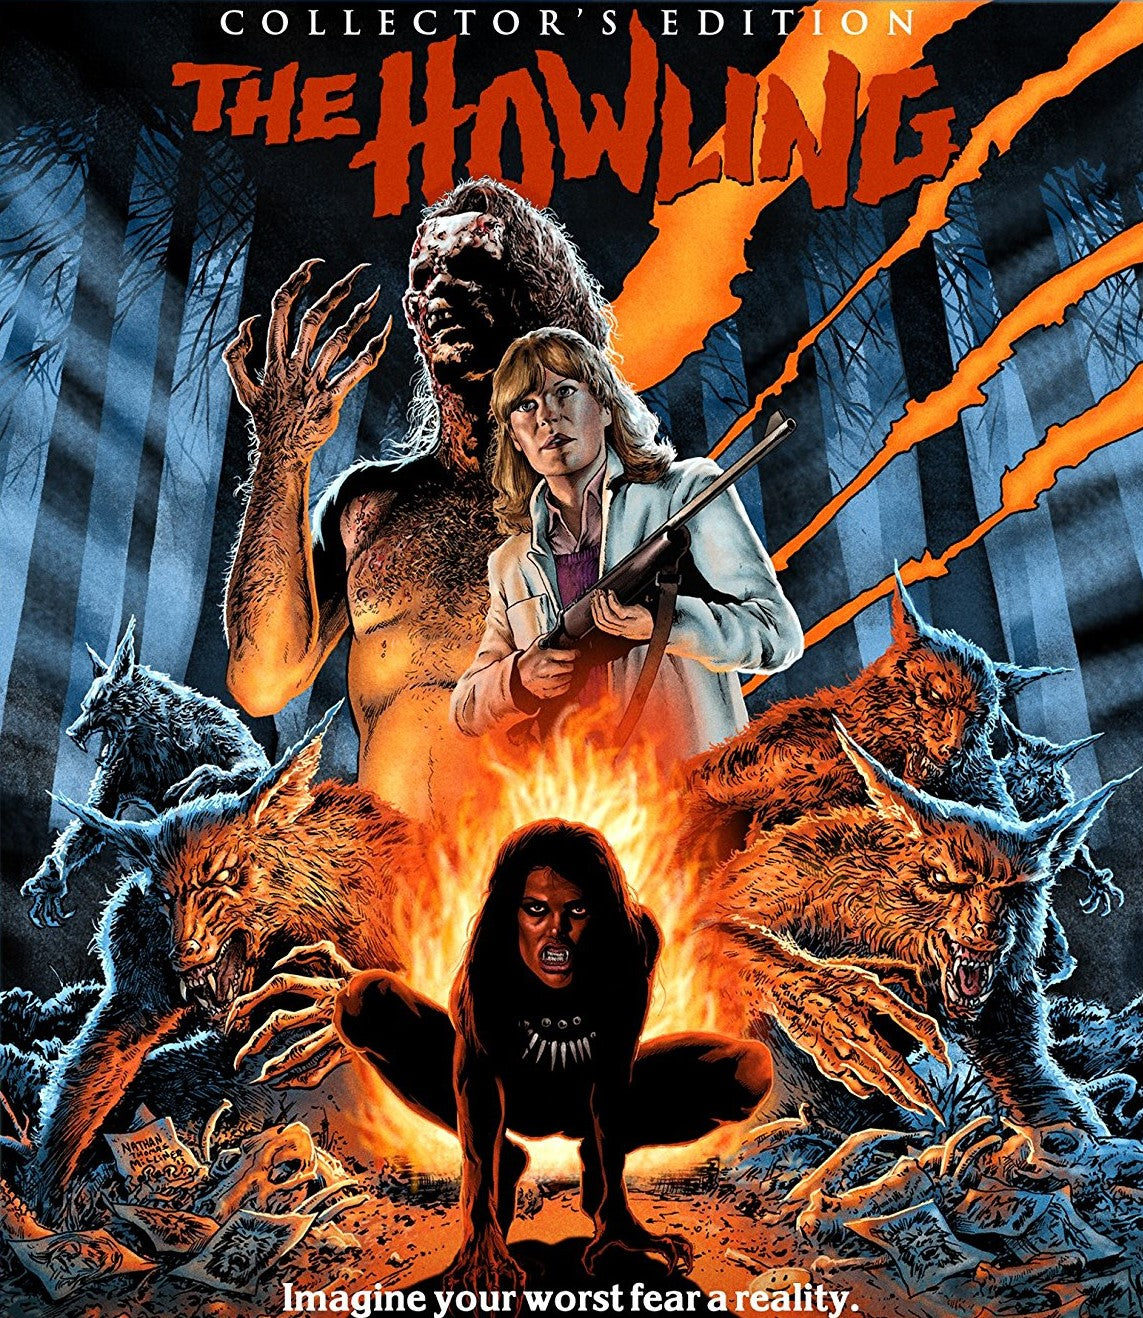 The Howling (Collectors Edition) Blu-Ray Blu-Ray